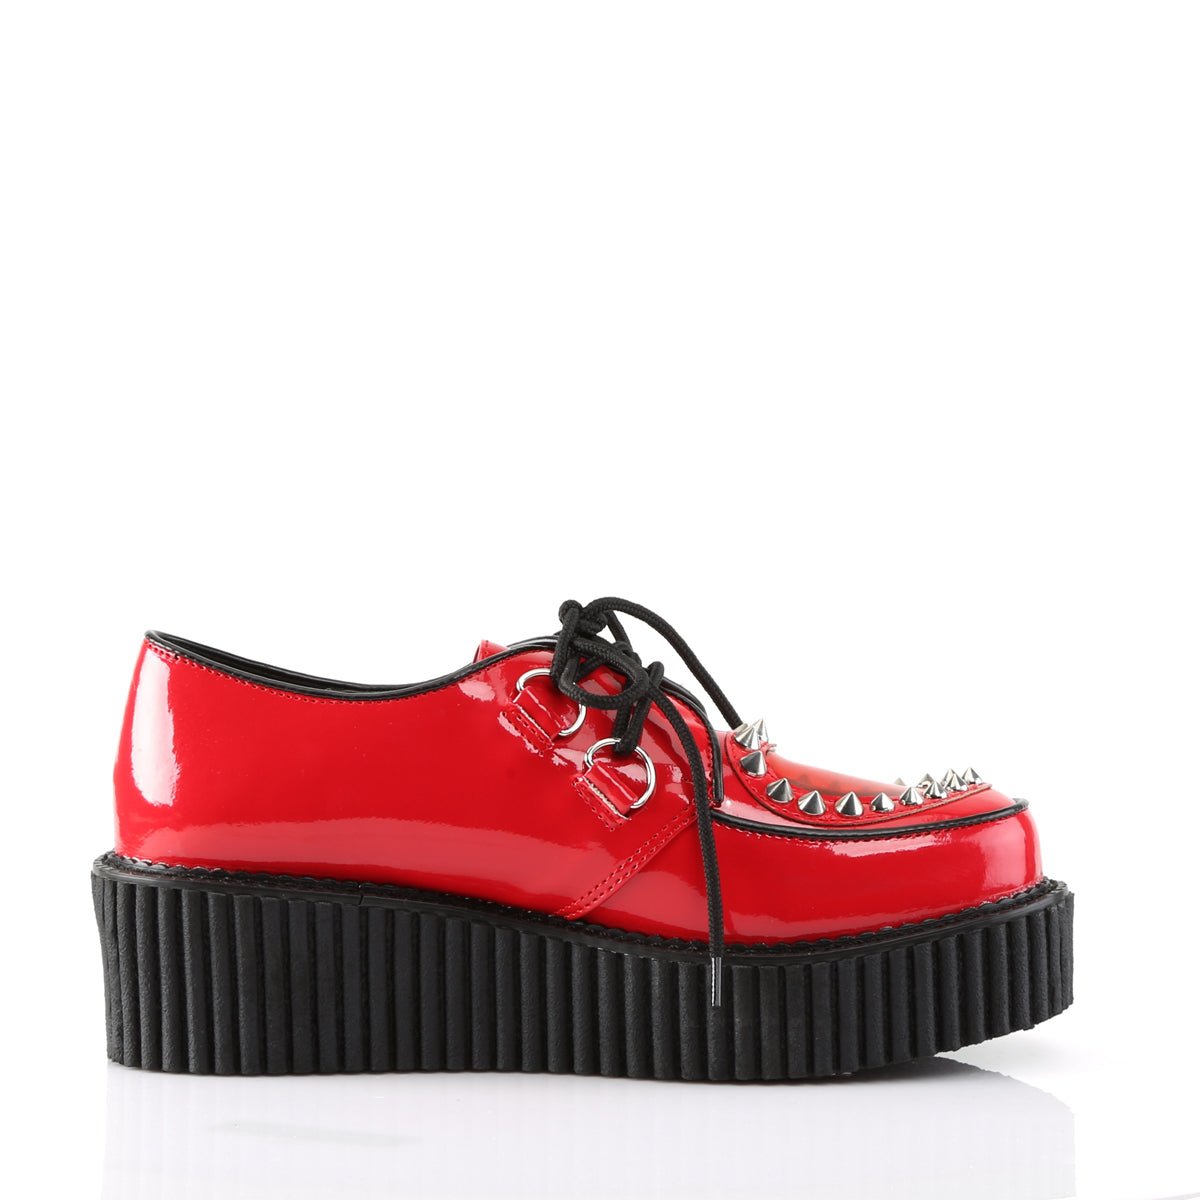 Too Fast | Demonia Creeper 108 | Red Patent Leather &amp; Pvc Women&#39;s Creepers